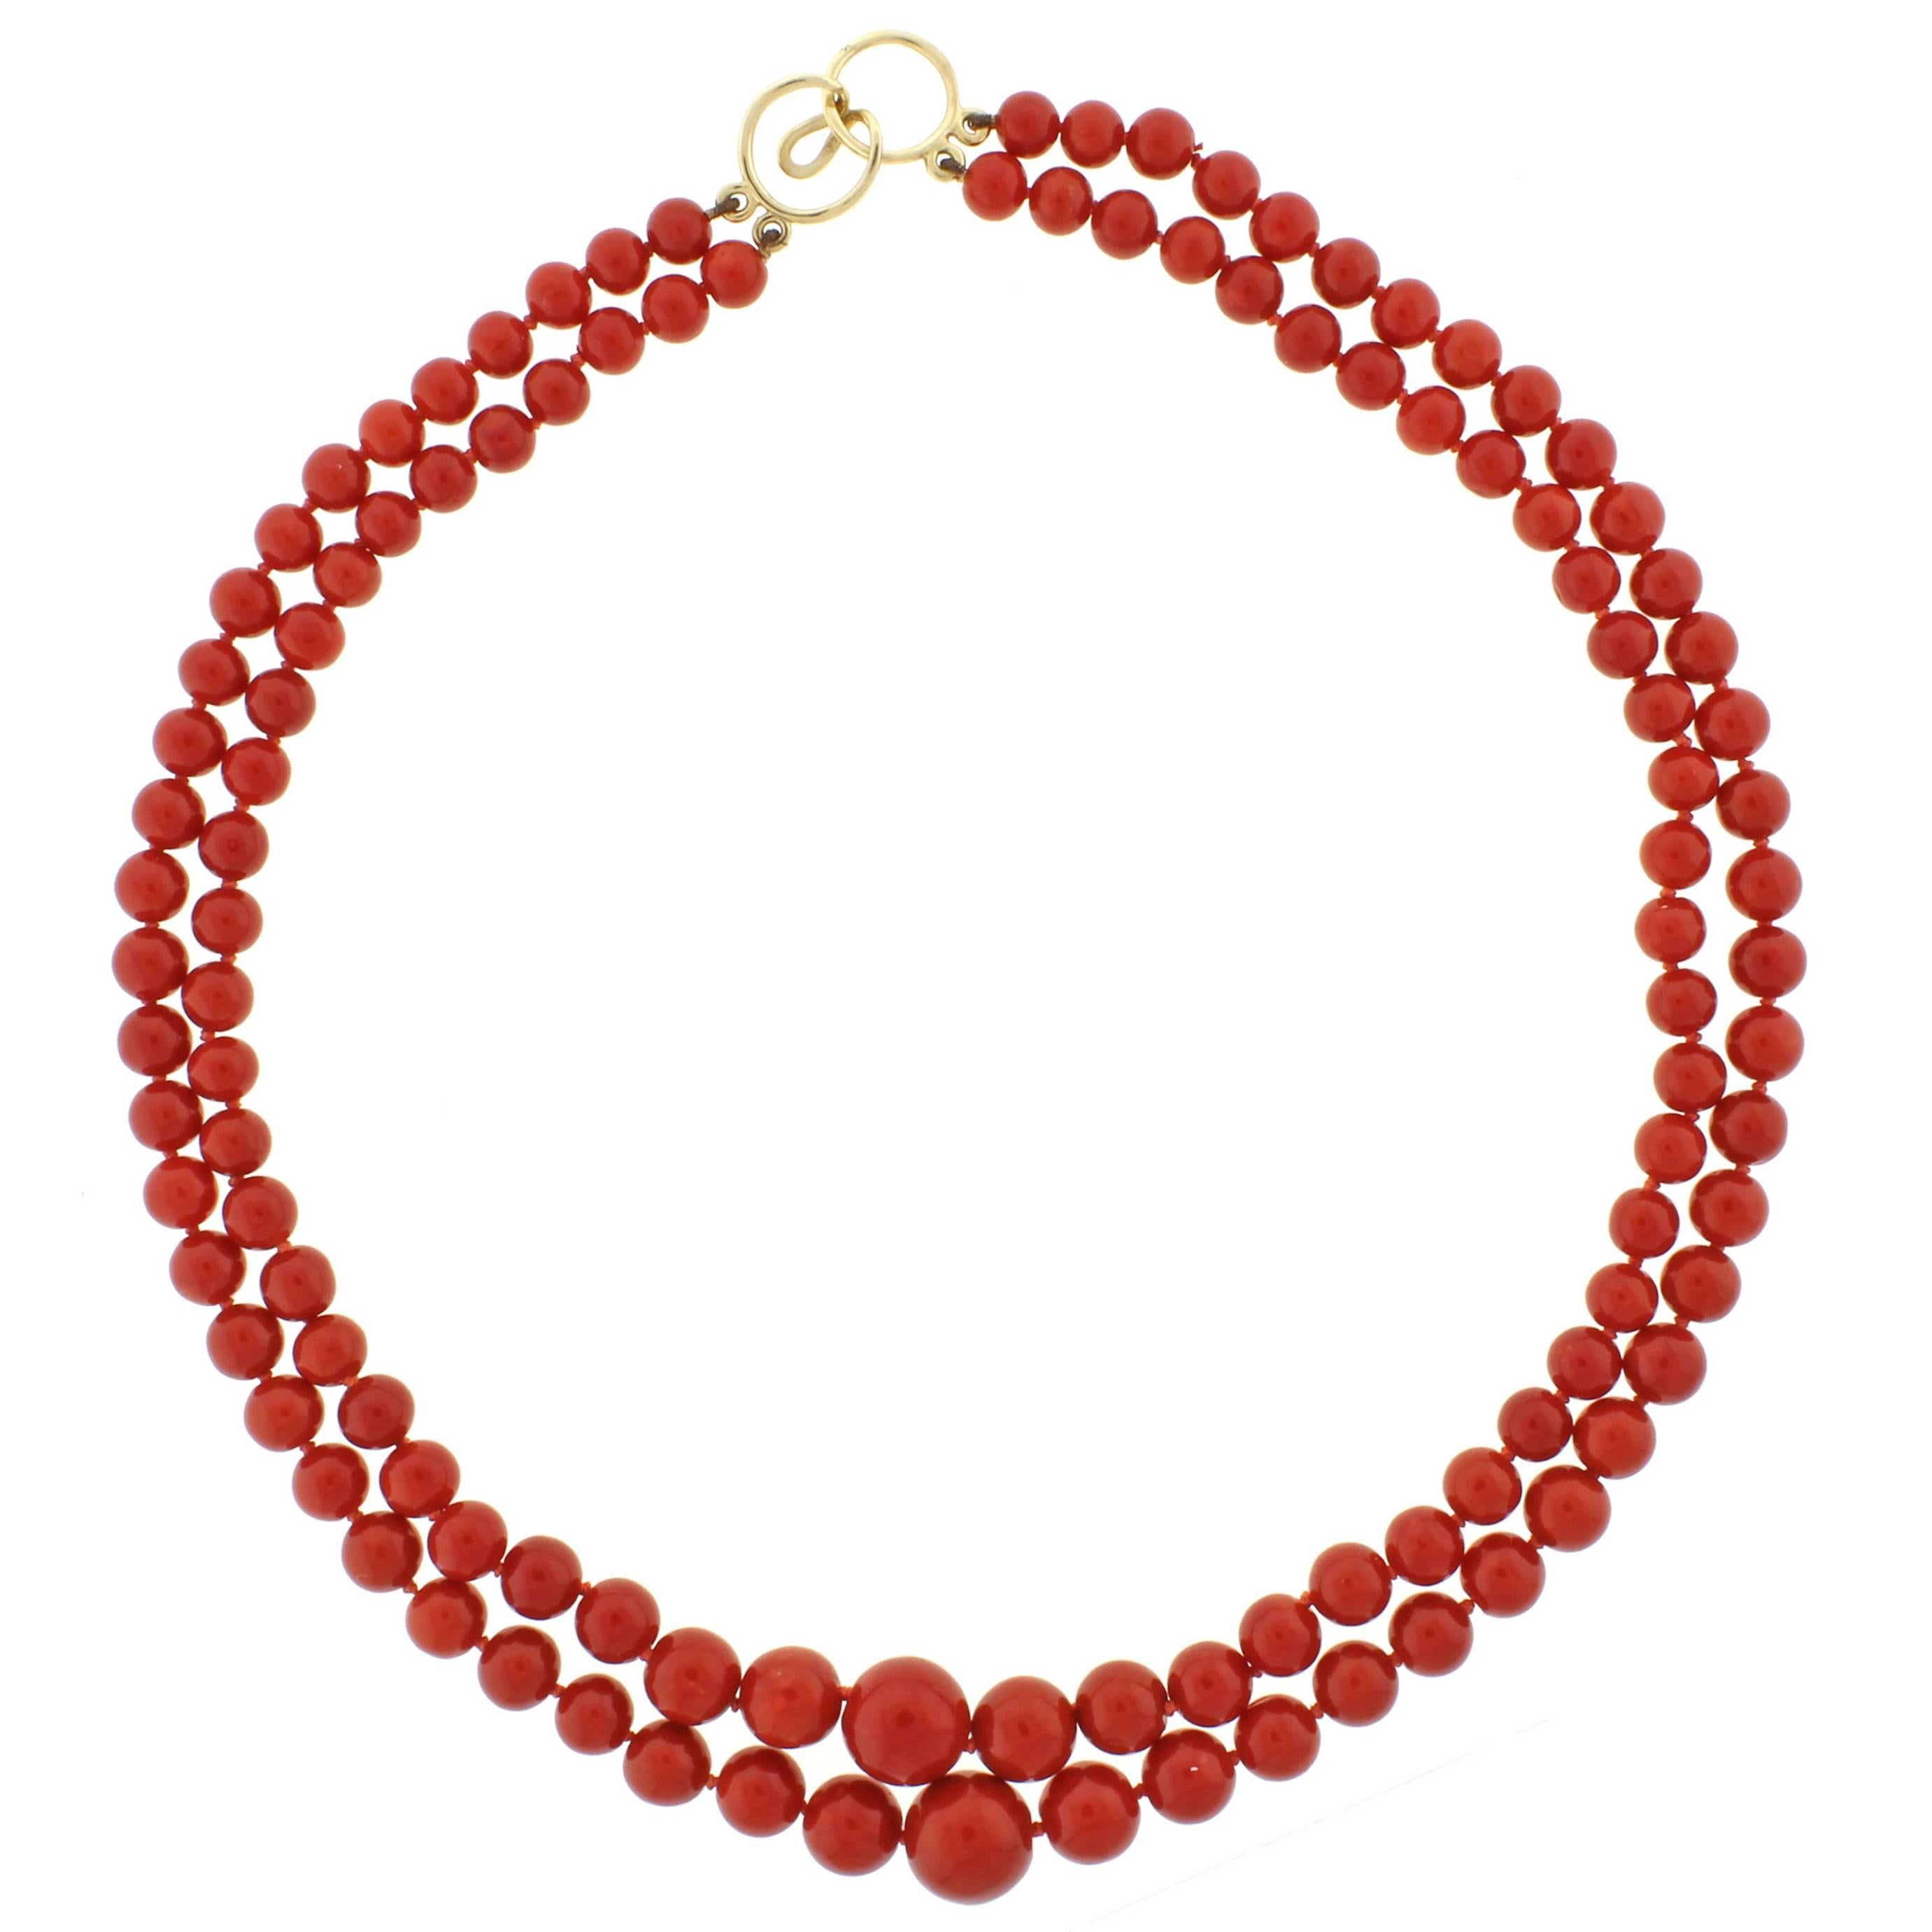 Ox Blood Coral Double Strand Necklace